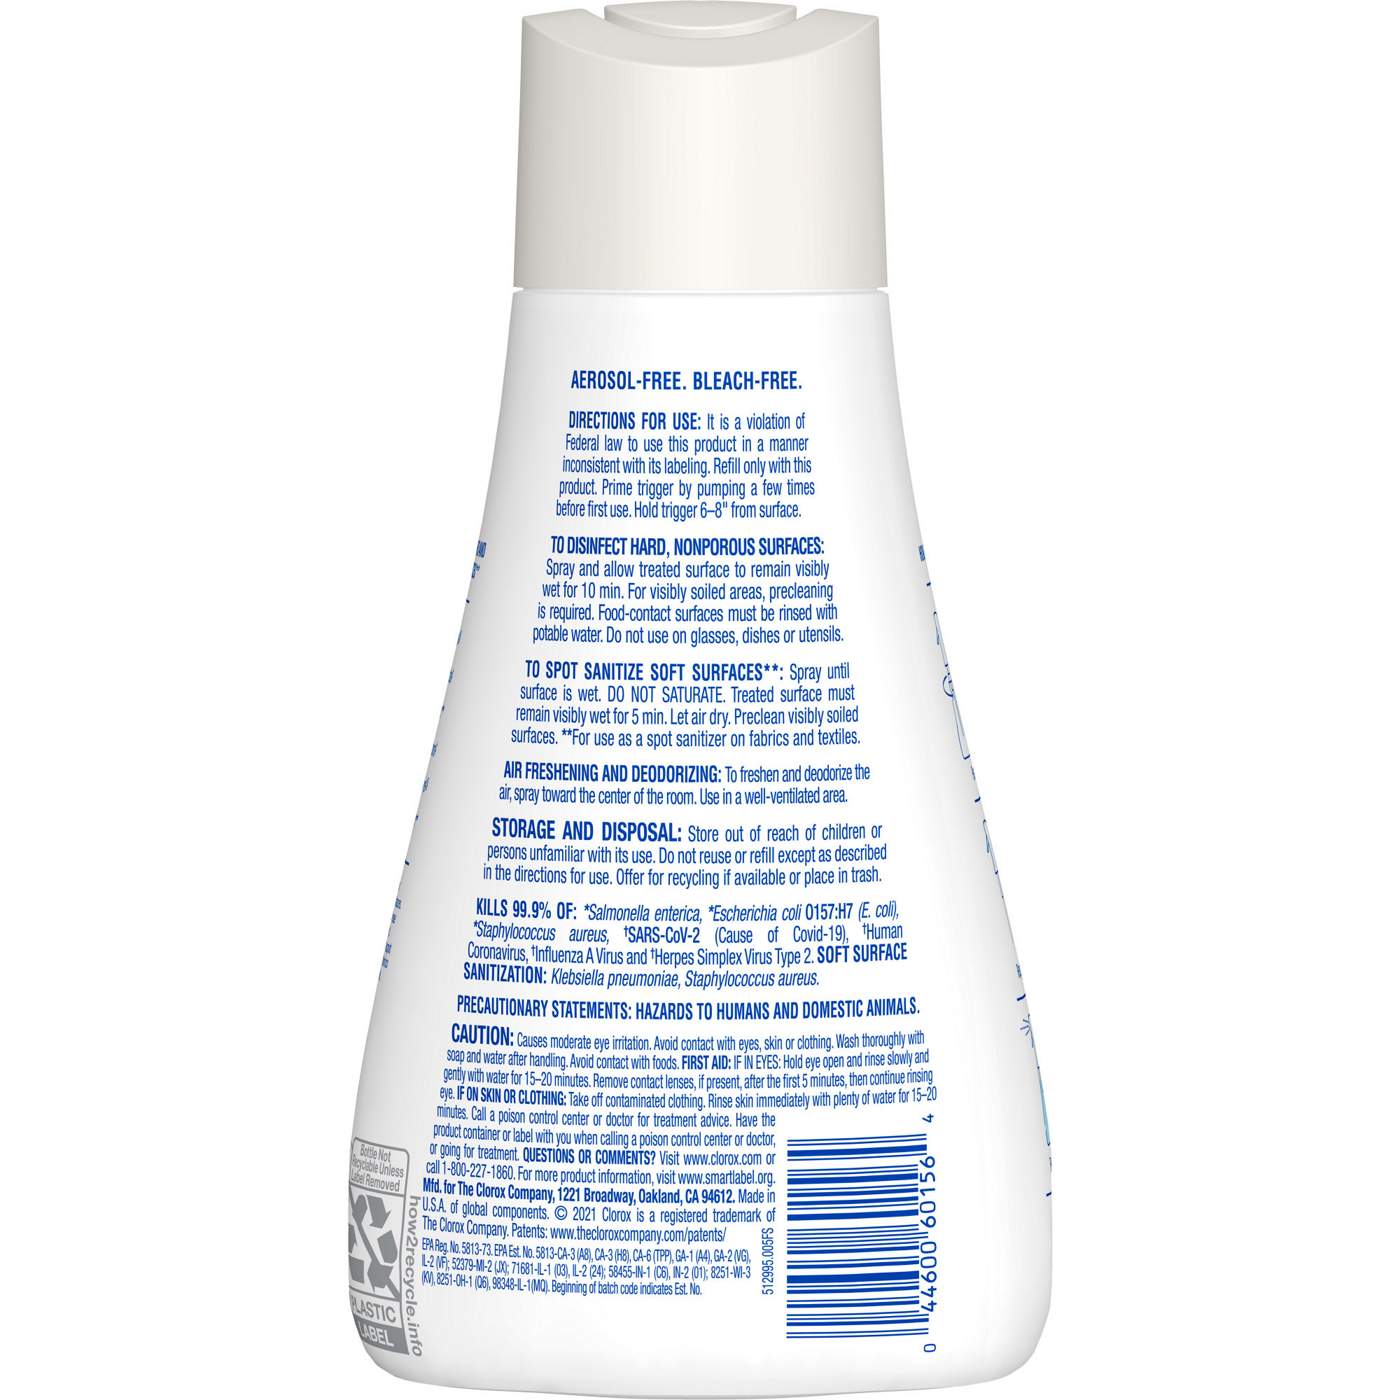 Clorox Eucalyptus Peppermint Multi-Surface Disinfecting Mist Refill; image 12 of 19